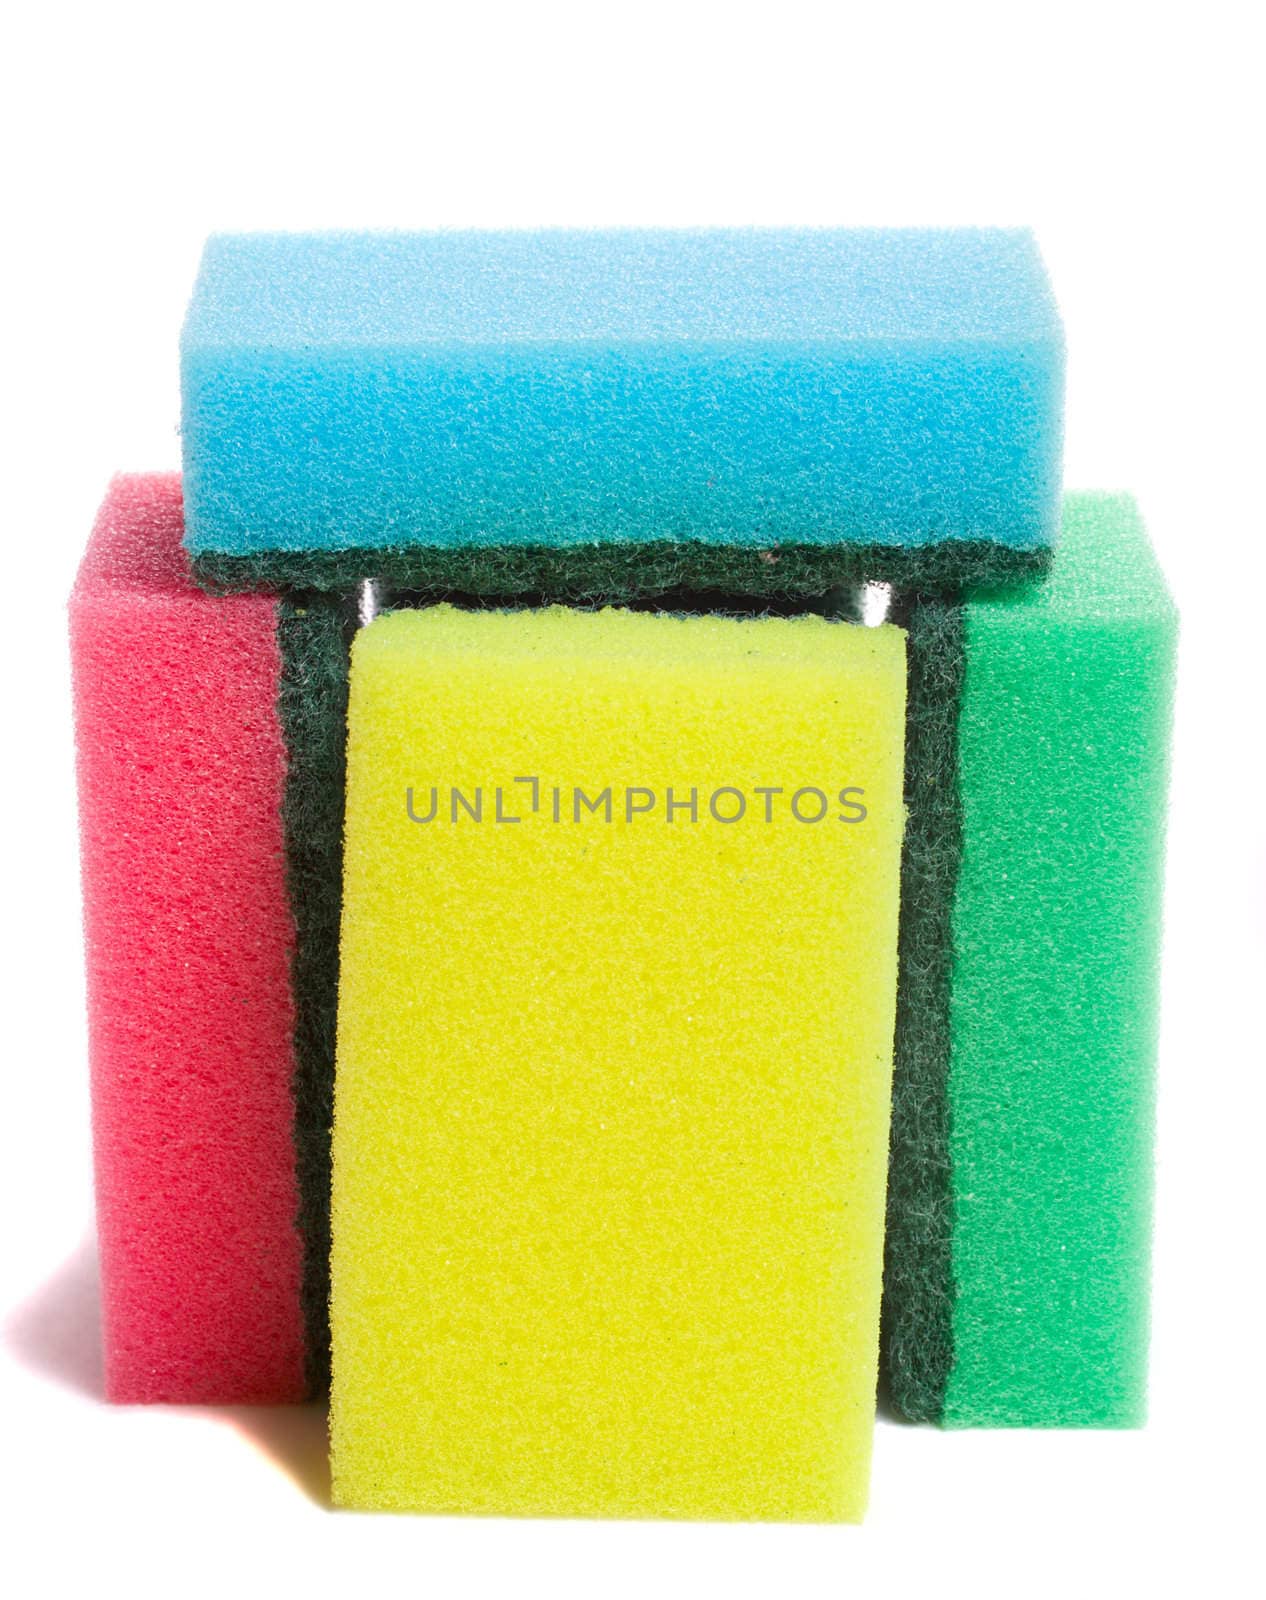 colored sponges, isolated on white